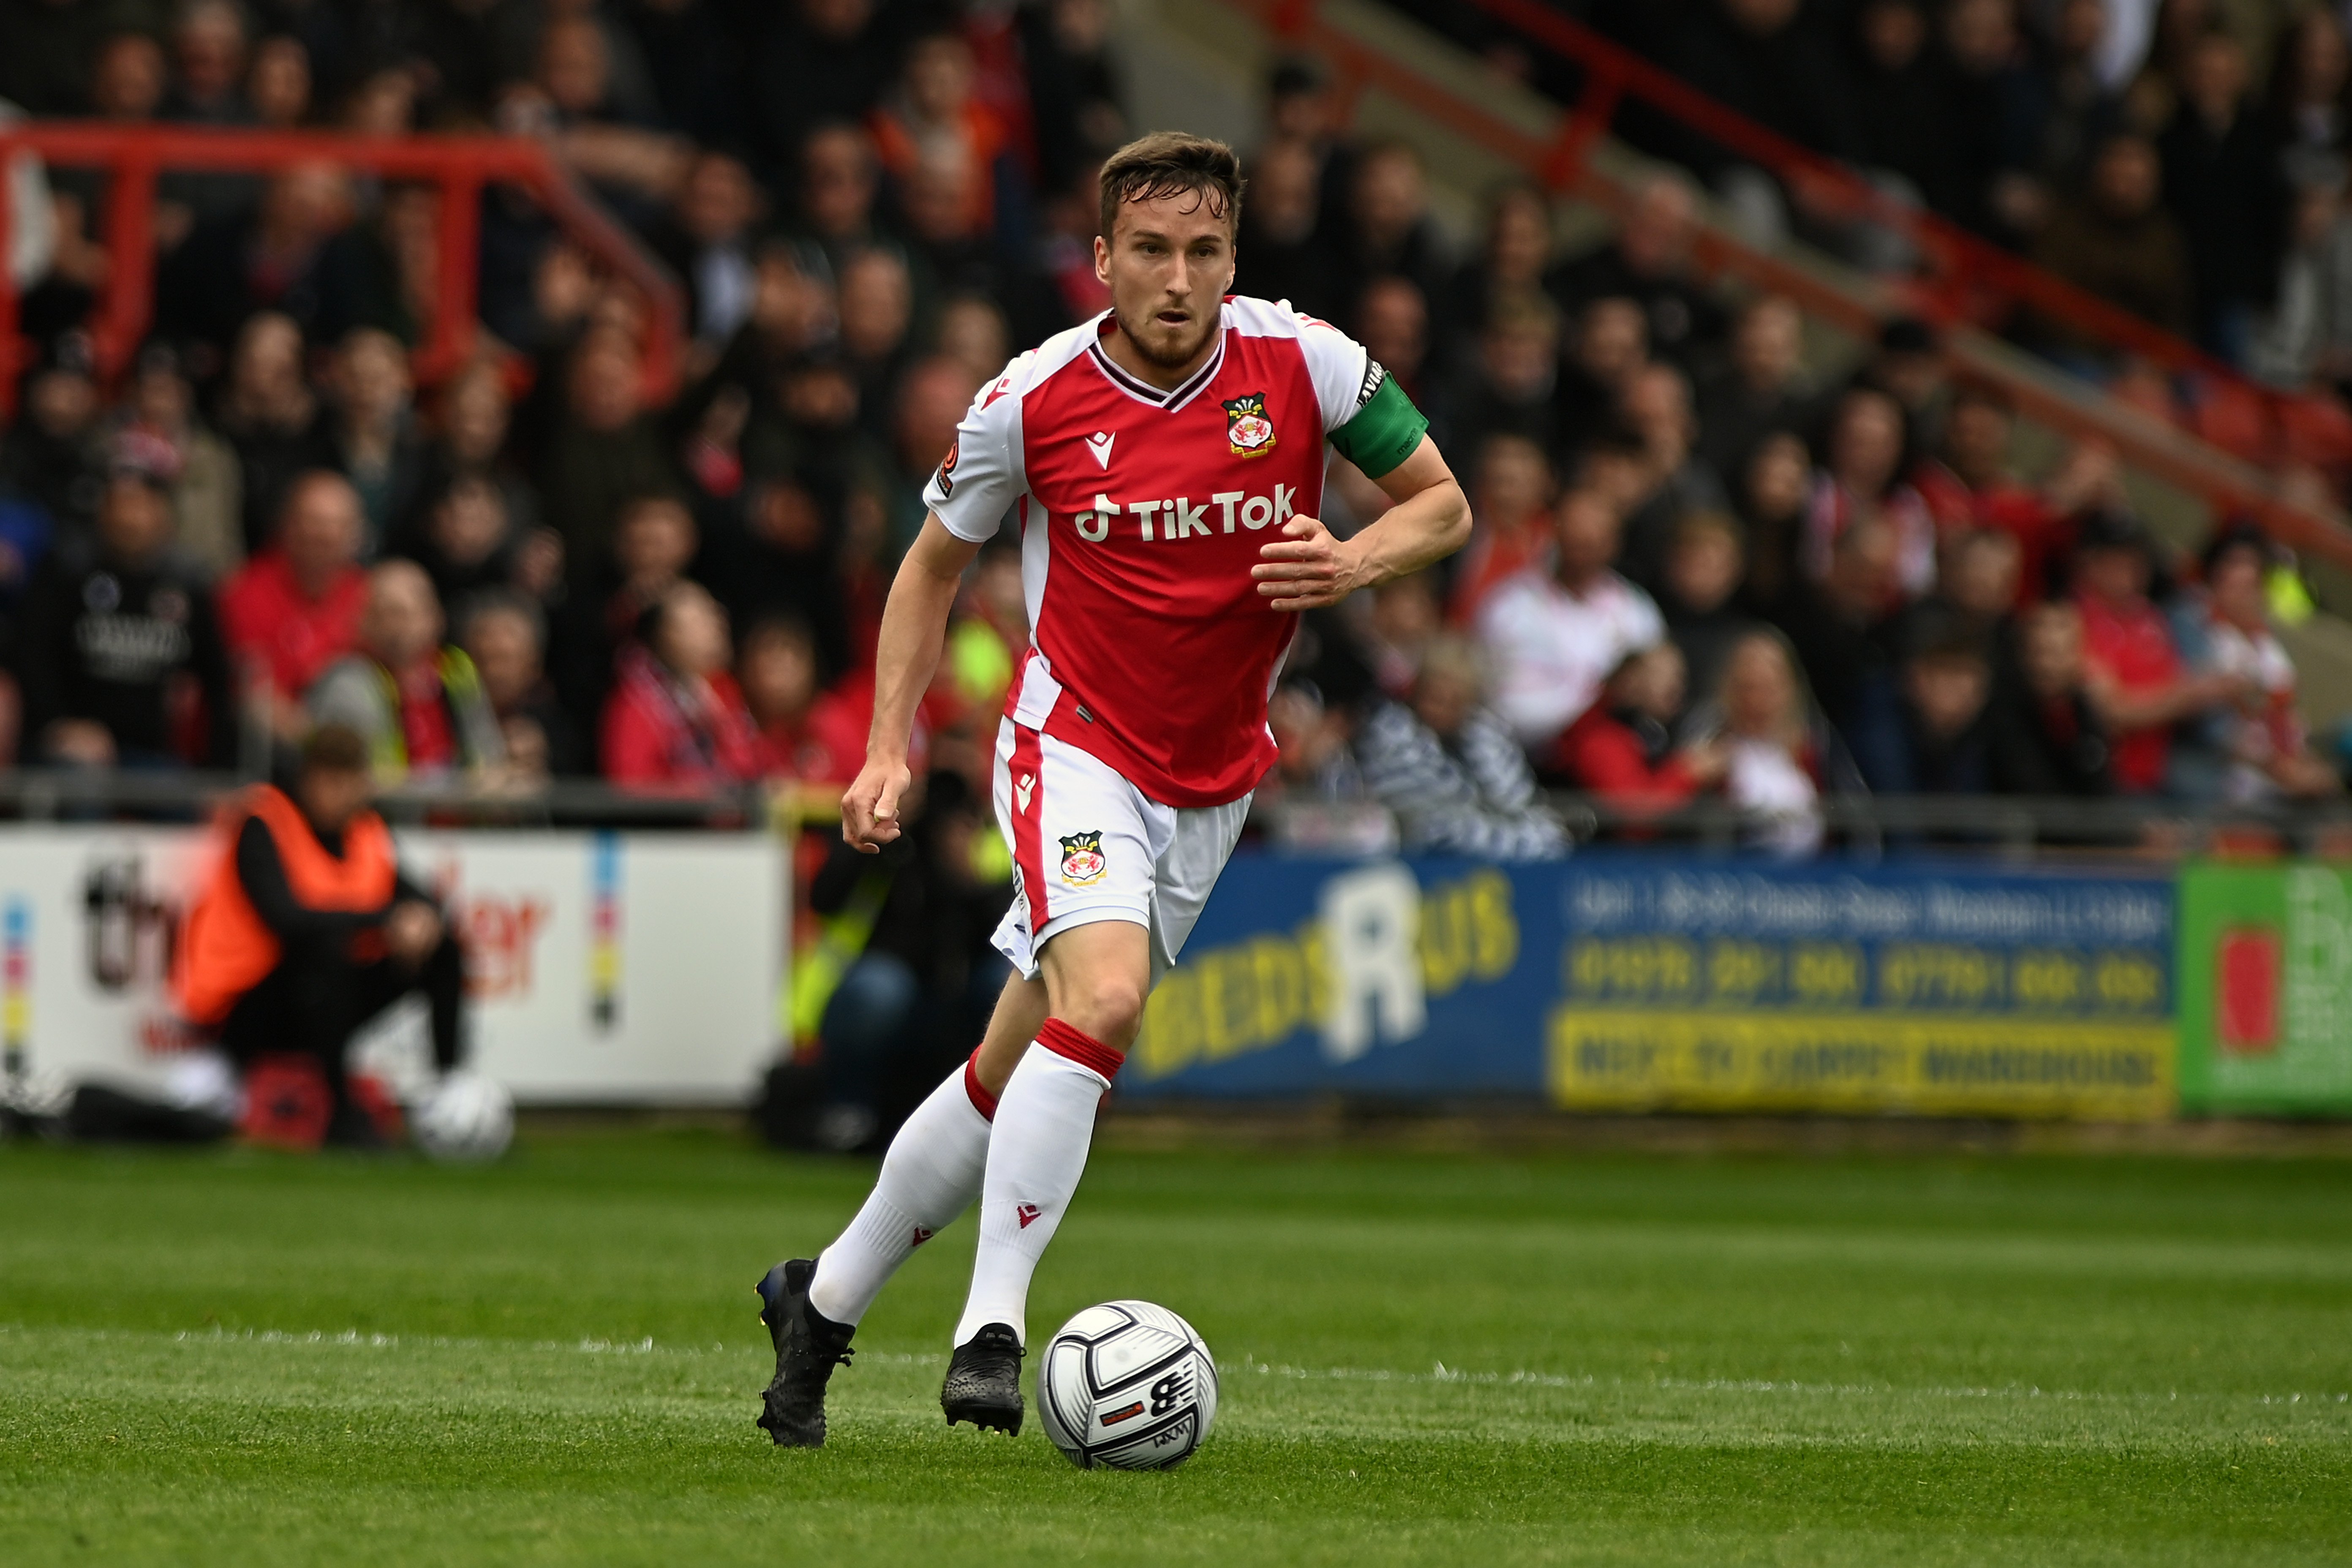 Luke Young playing for Wrexham